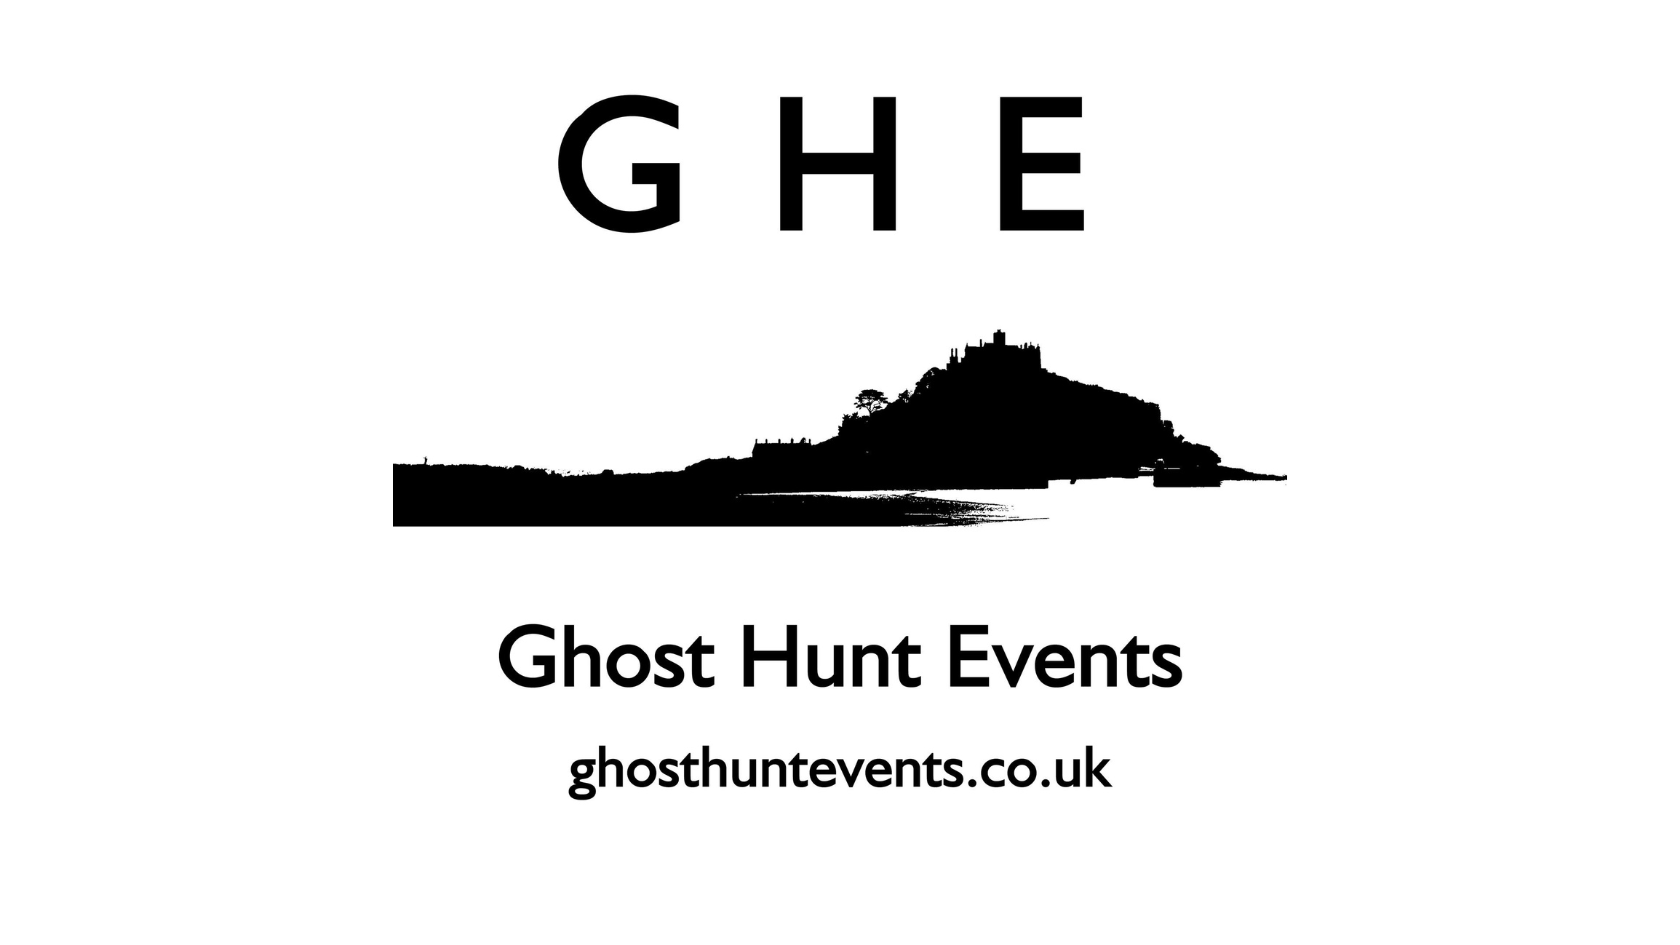 Ghost hunt events logo